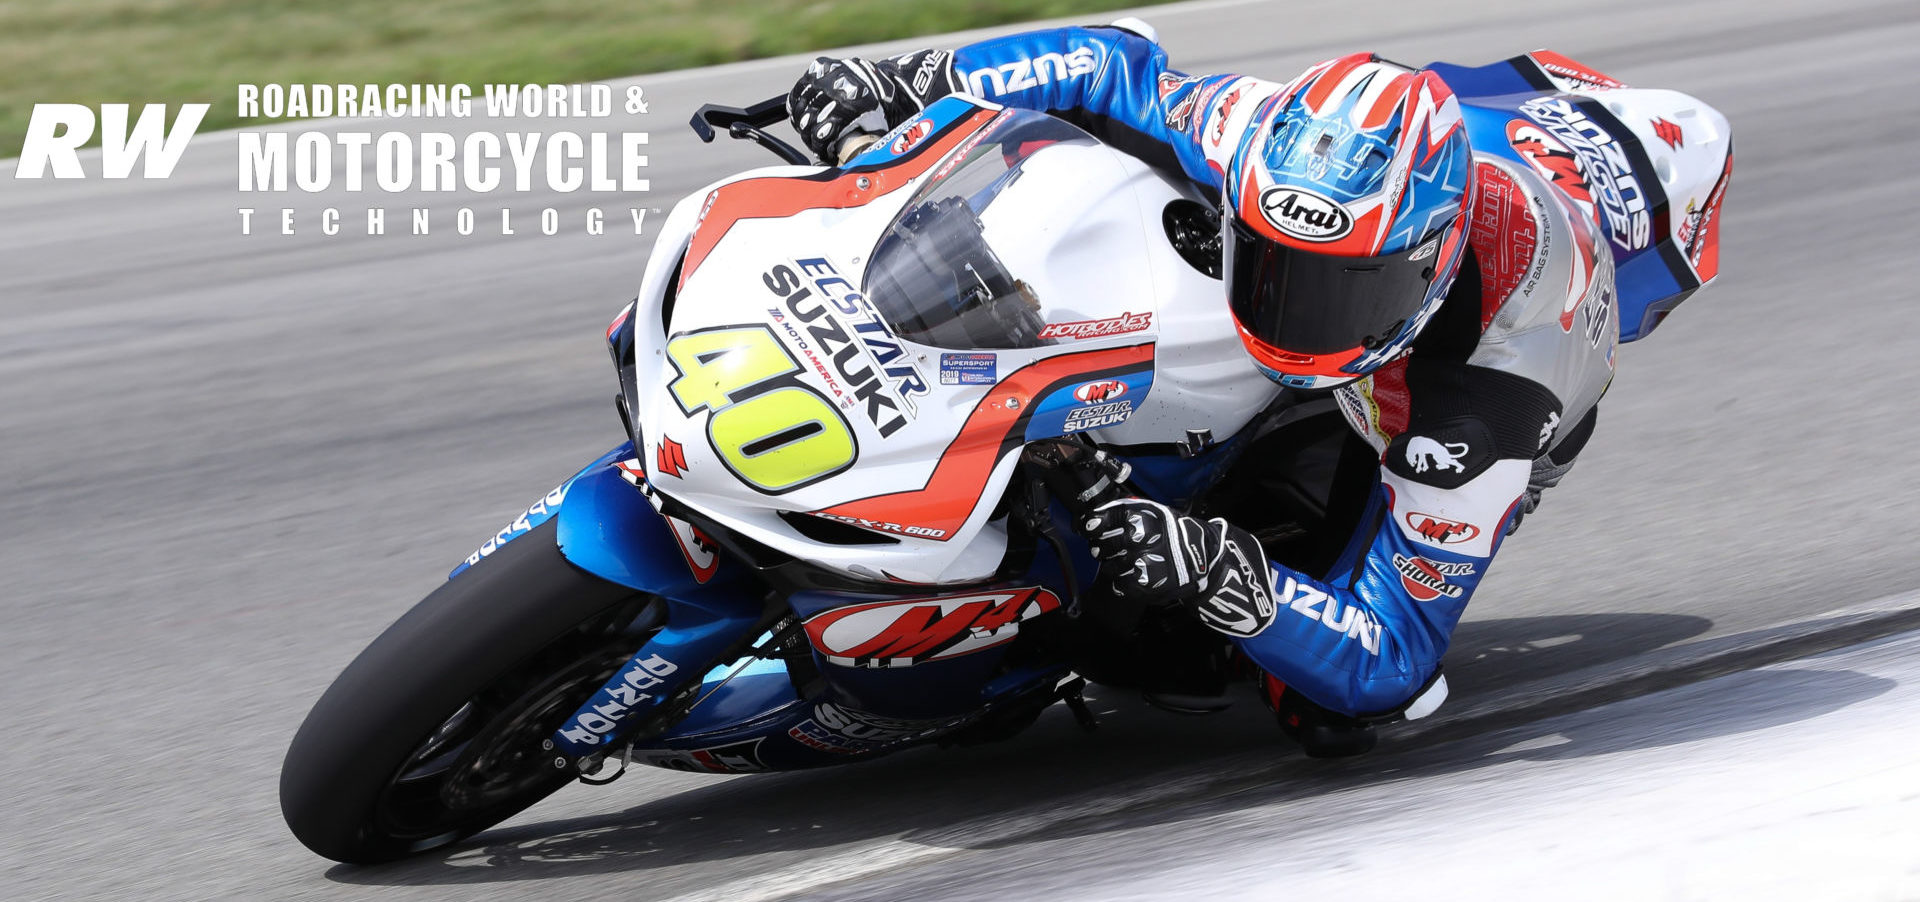 Sean Dylan Kelly (40) at speed on his M4 ECSTAR Suzuki GSX-R600 during the 2019 MotoAmerica Supersport Championship. Photo by Brian J. Nelson.